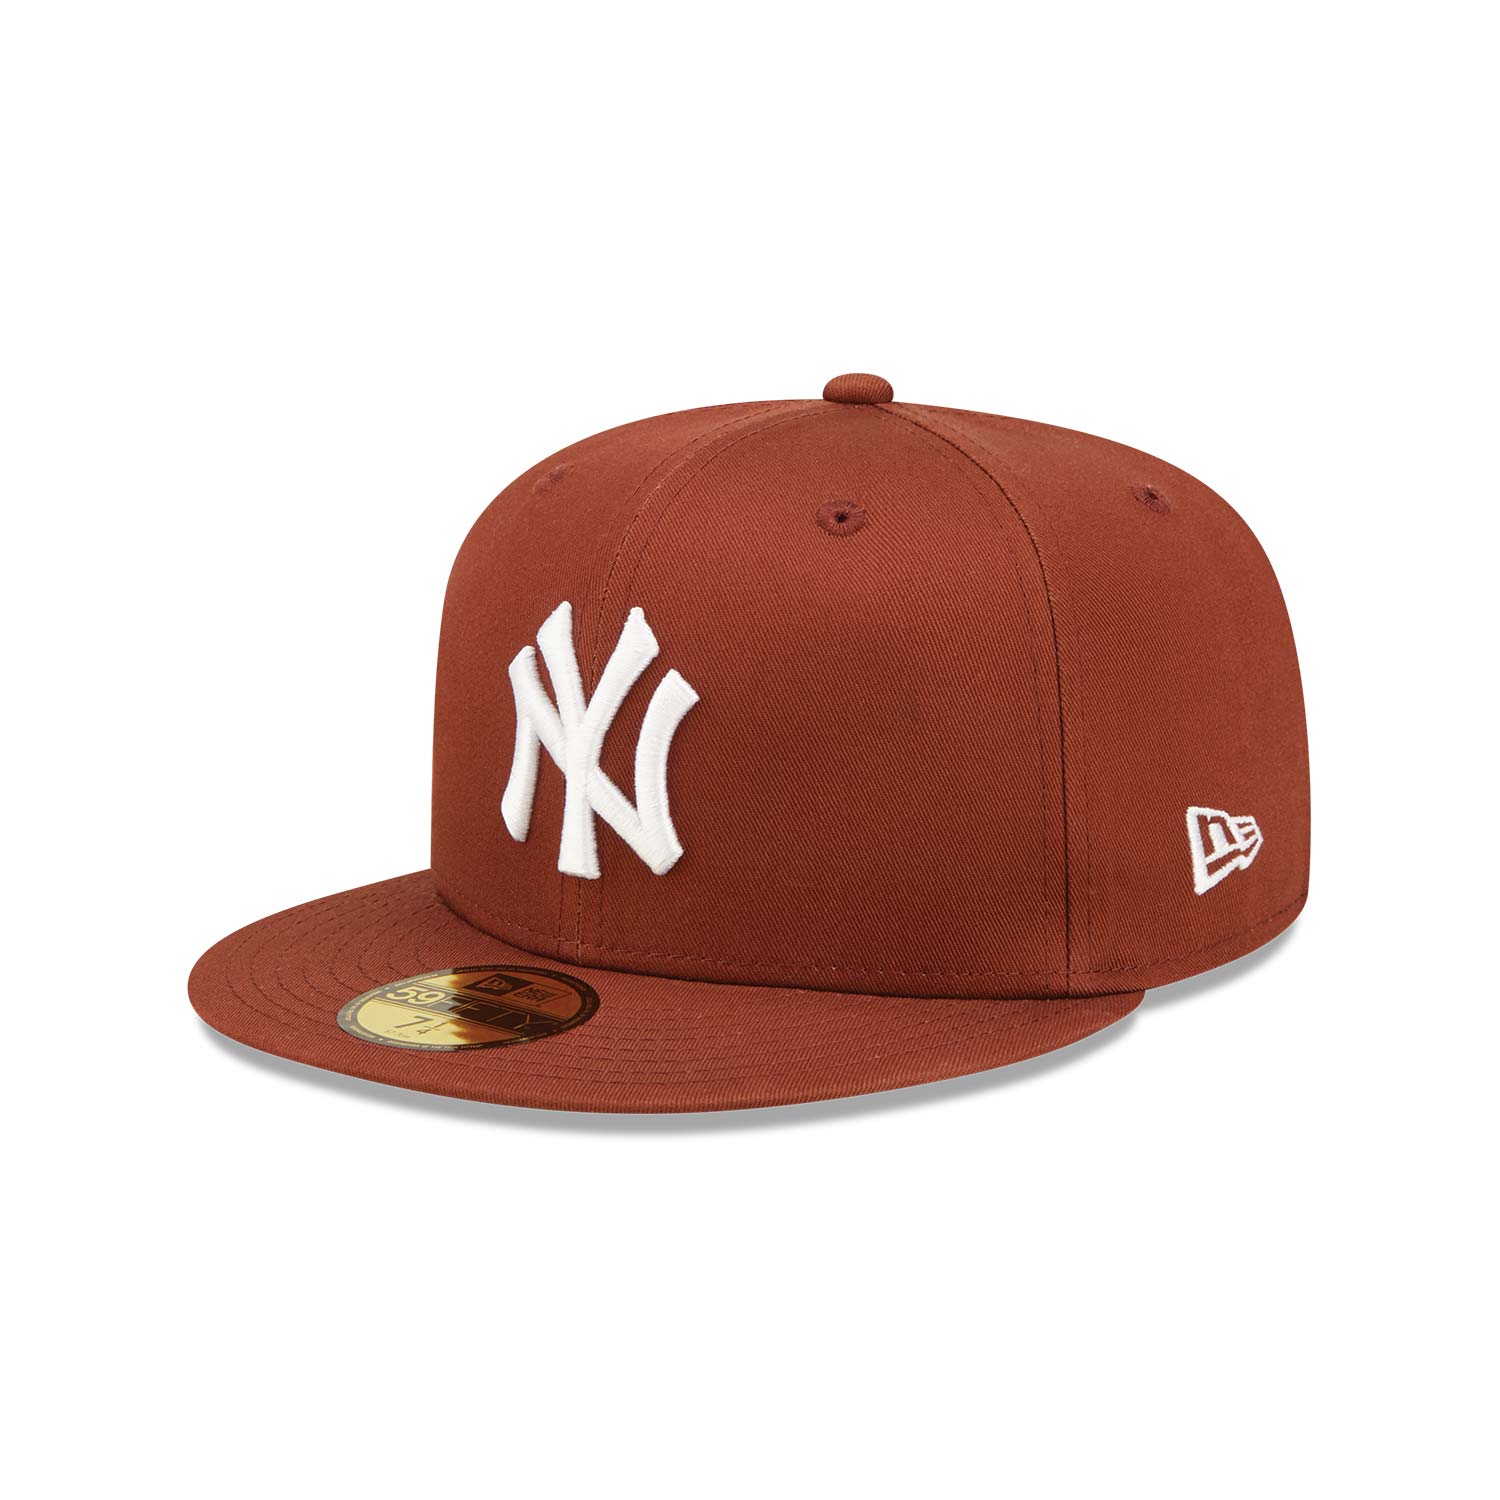 59FIFTY New York Yankees MLB 2-Tone Color Pack Brown/Charcoal - Grey UV 7 7/8